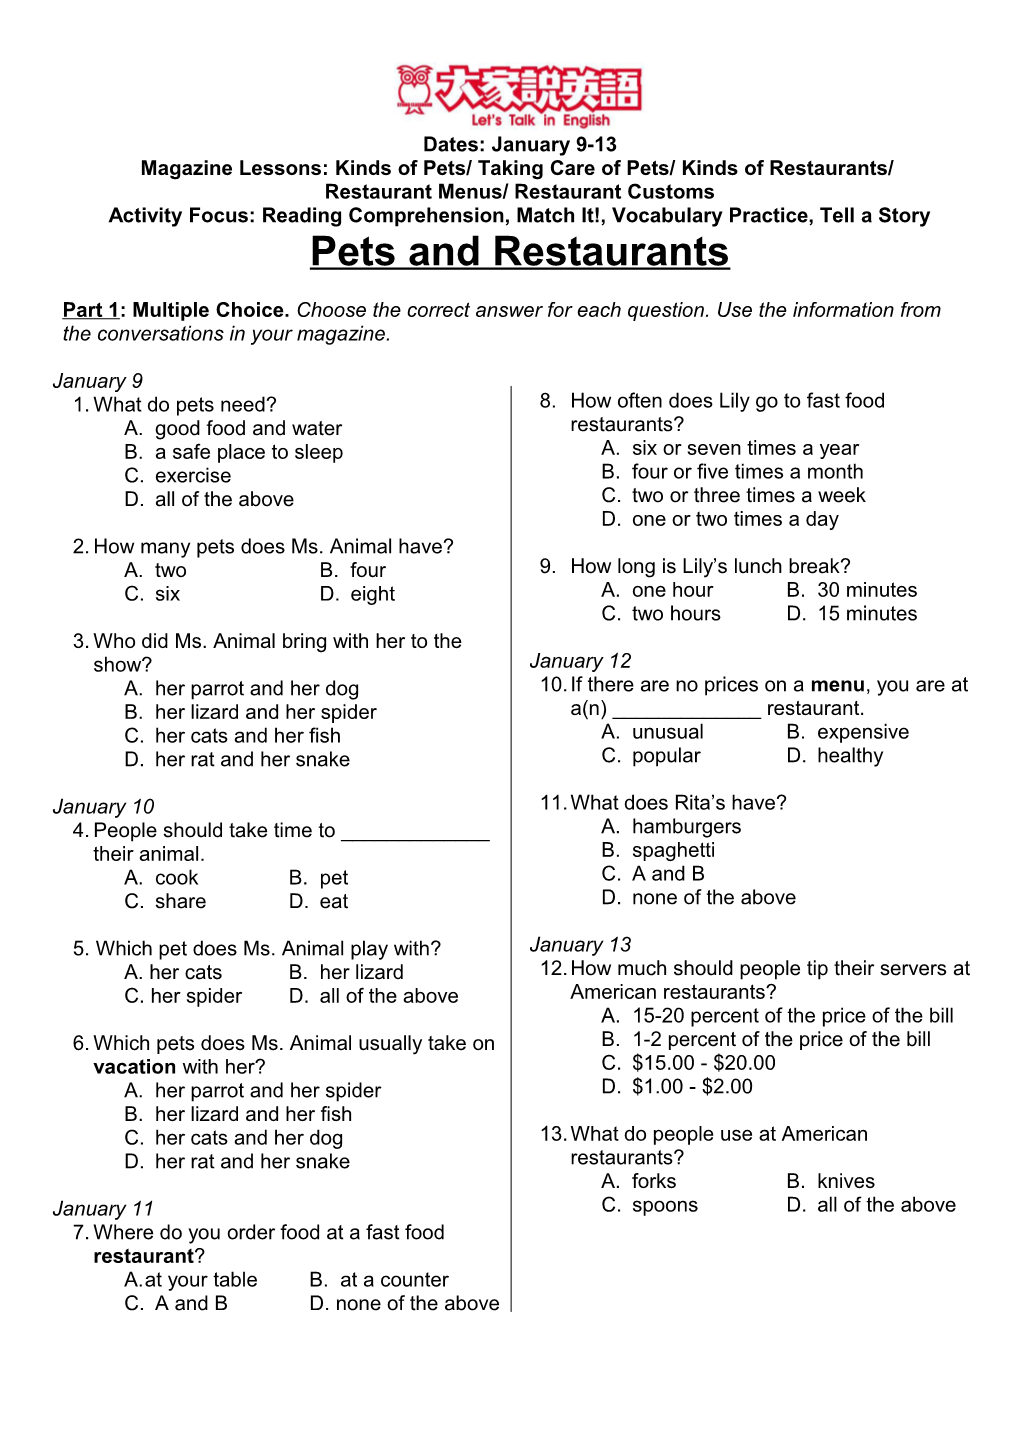 Magazine Lessons: Kinds of Pets/ Taking Care of Pets/ Kinds of Restaurants